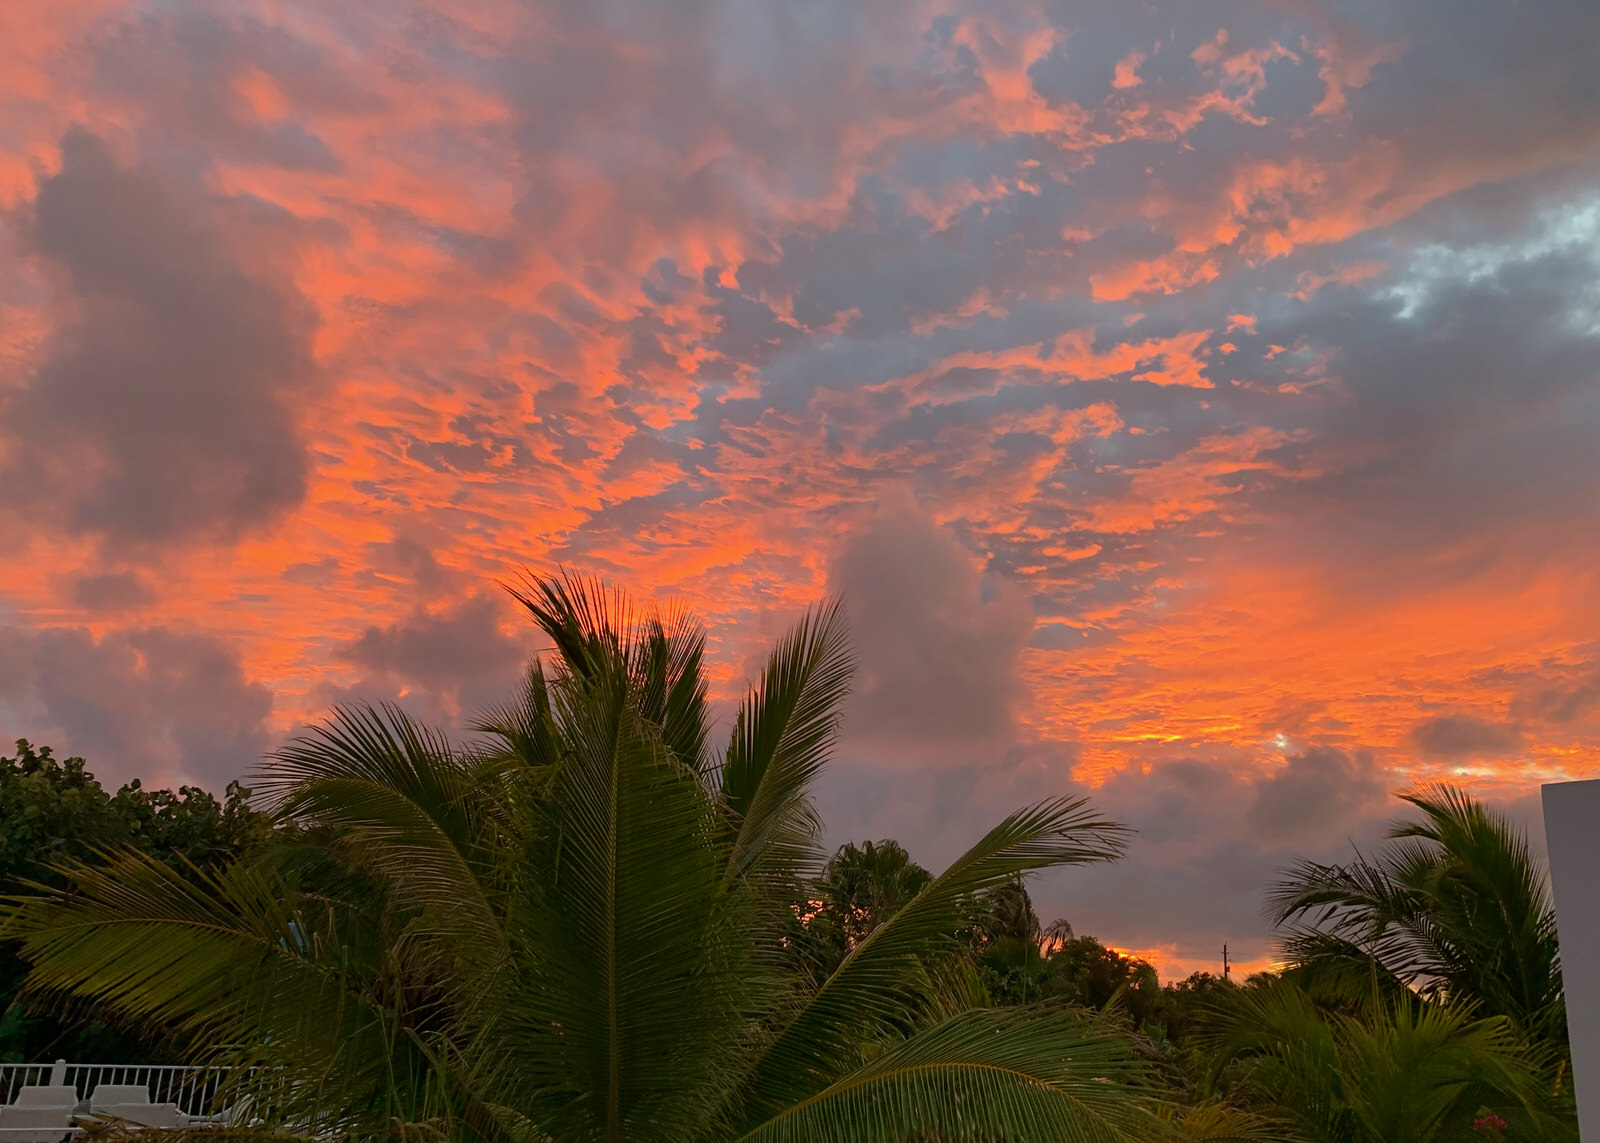 Sunset in Turks and Caicos